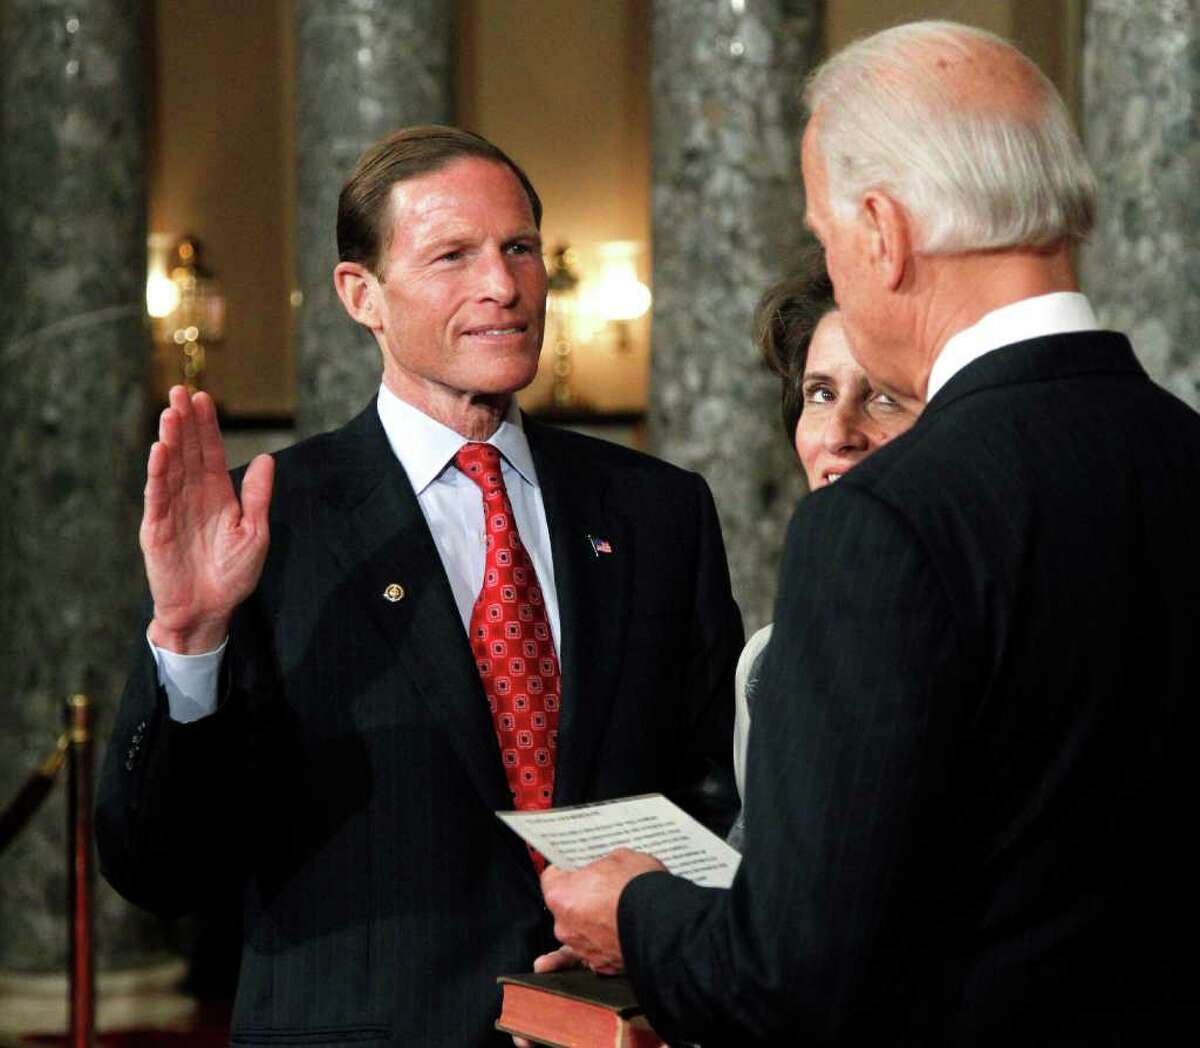 Vice President Joe Biden administers a ceremonial Senate oath during a mock swearing-in ceremony to Sen. Richard Blumenthal, D-Conn., left, accompanied by his wife Cynthia, Wednesday, Jan. 5, 2011, in the Old Senate Chamber on Capitol Hill in Washington. (AP Photo/Manuel Balce Ceneta)